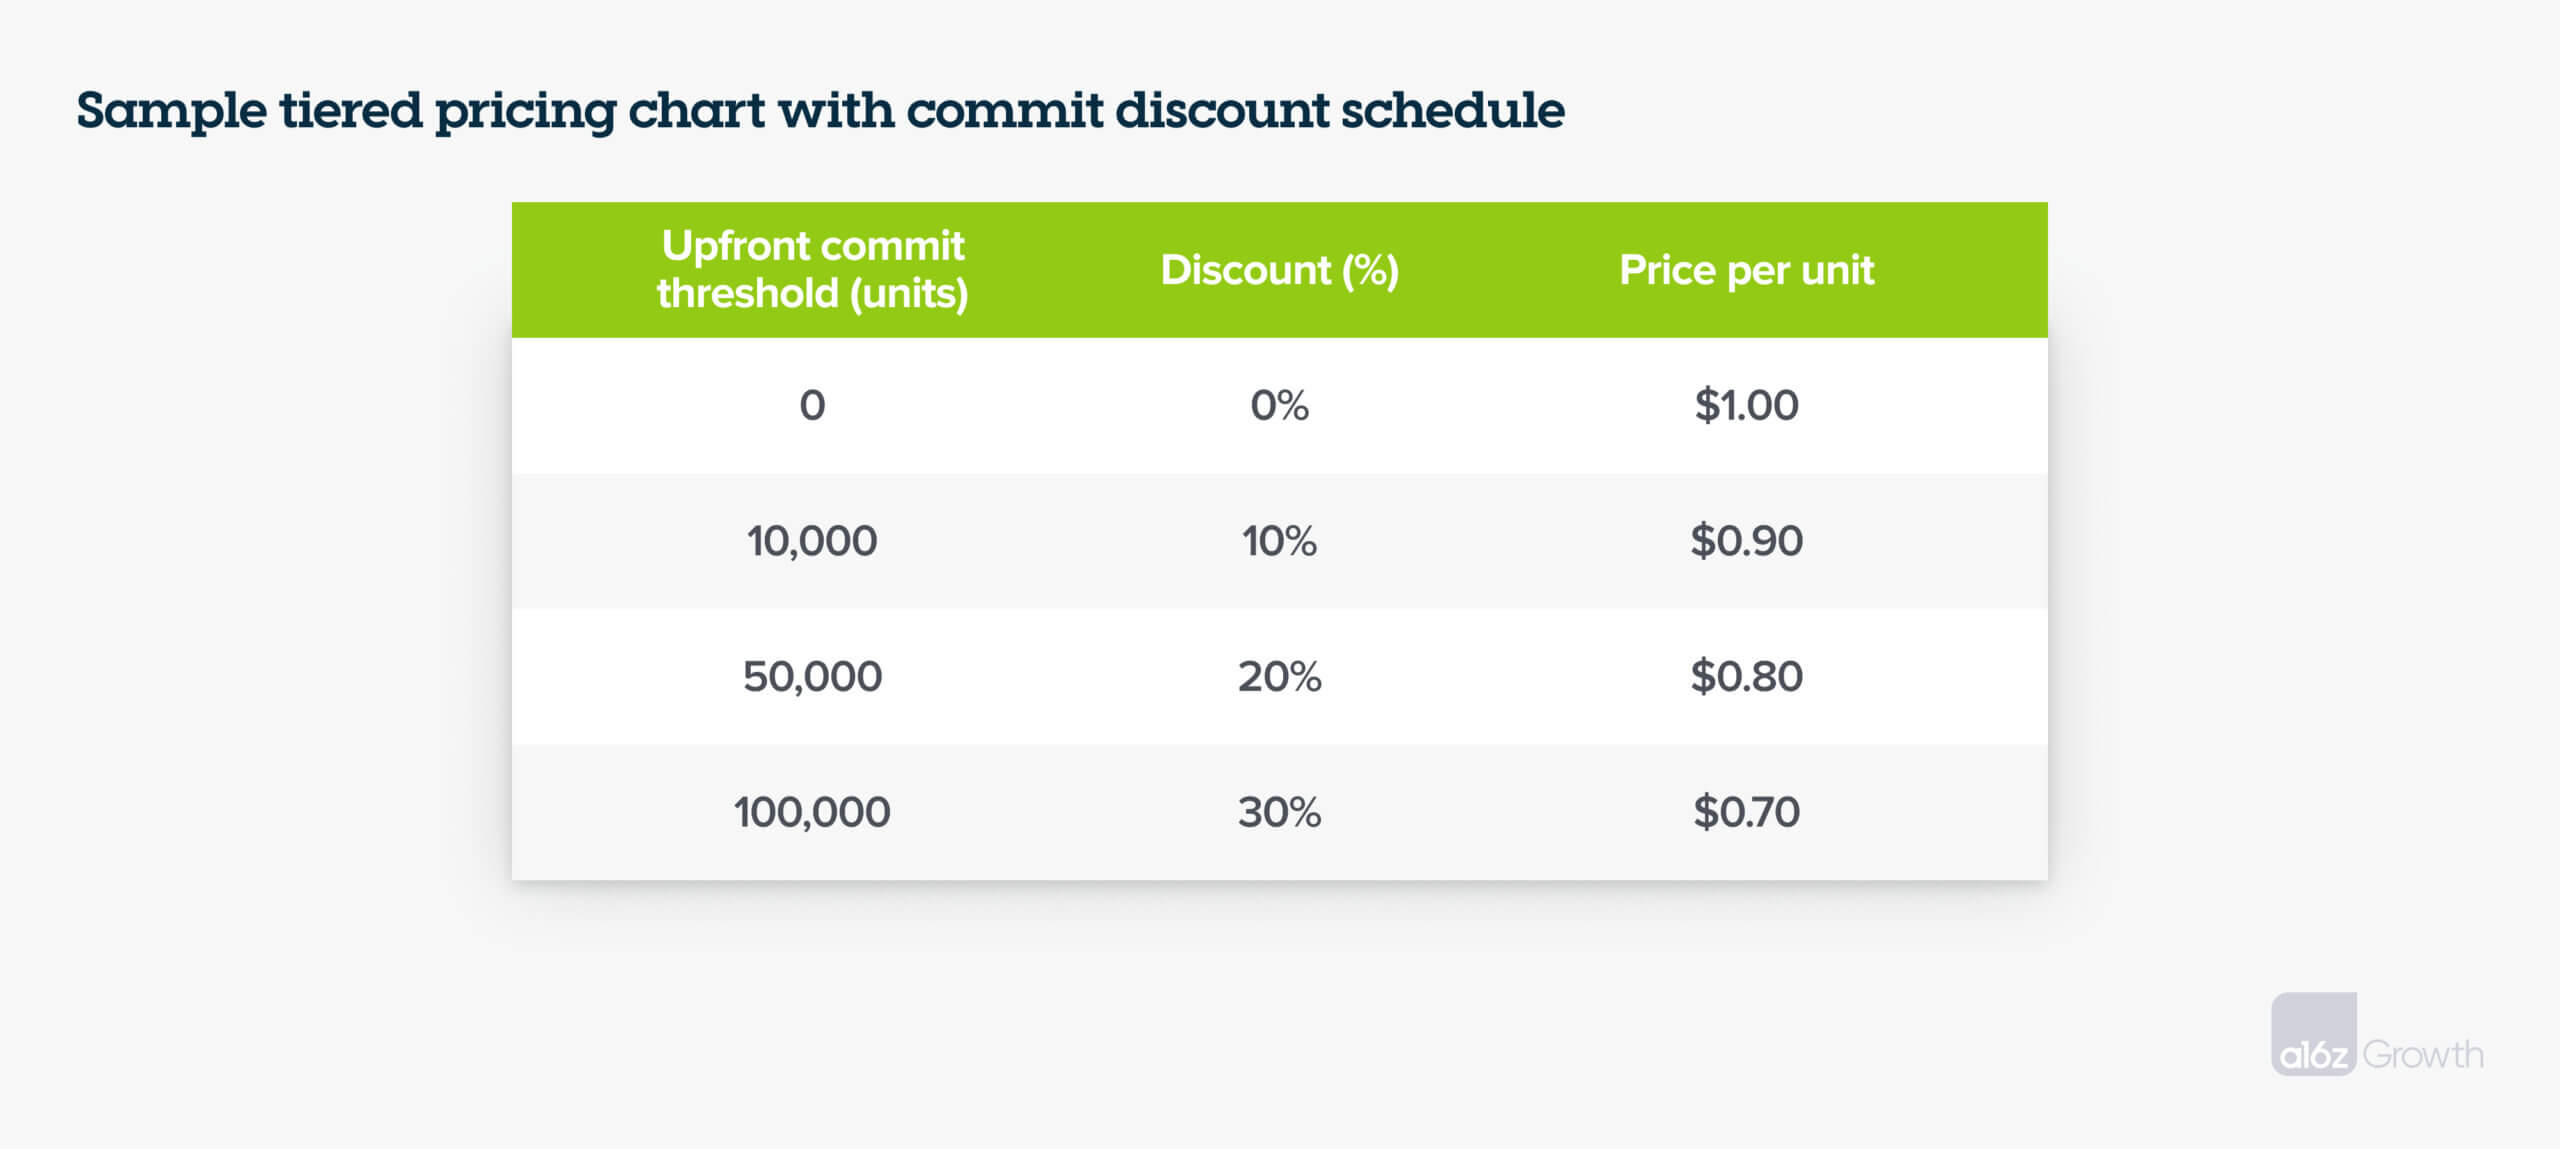 Sample tiered pricing chart with commit discount schedule